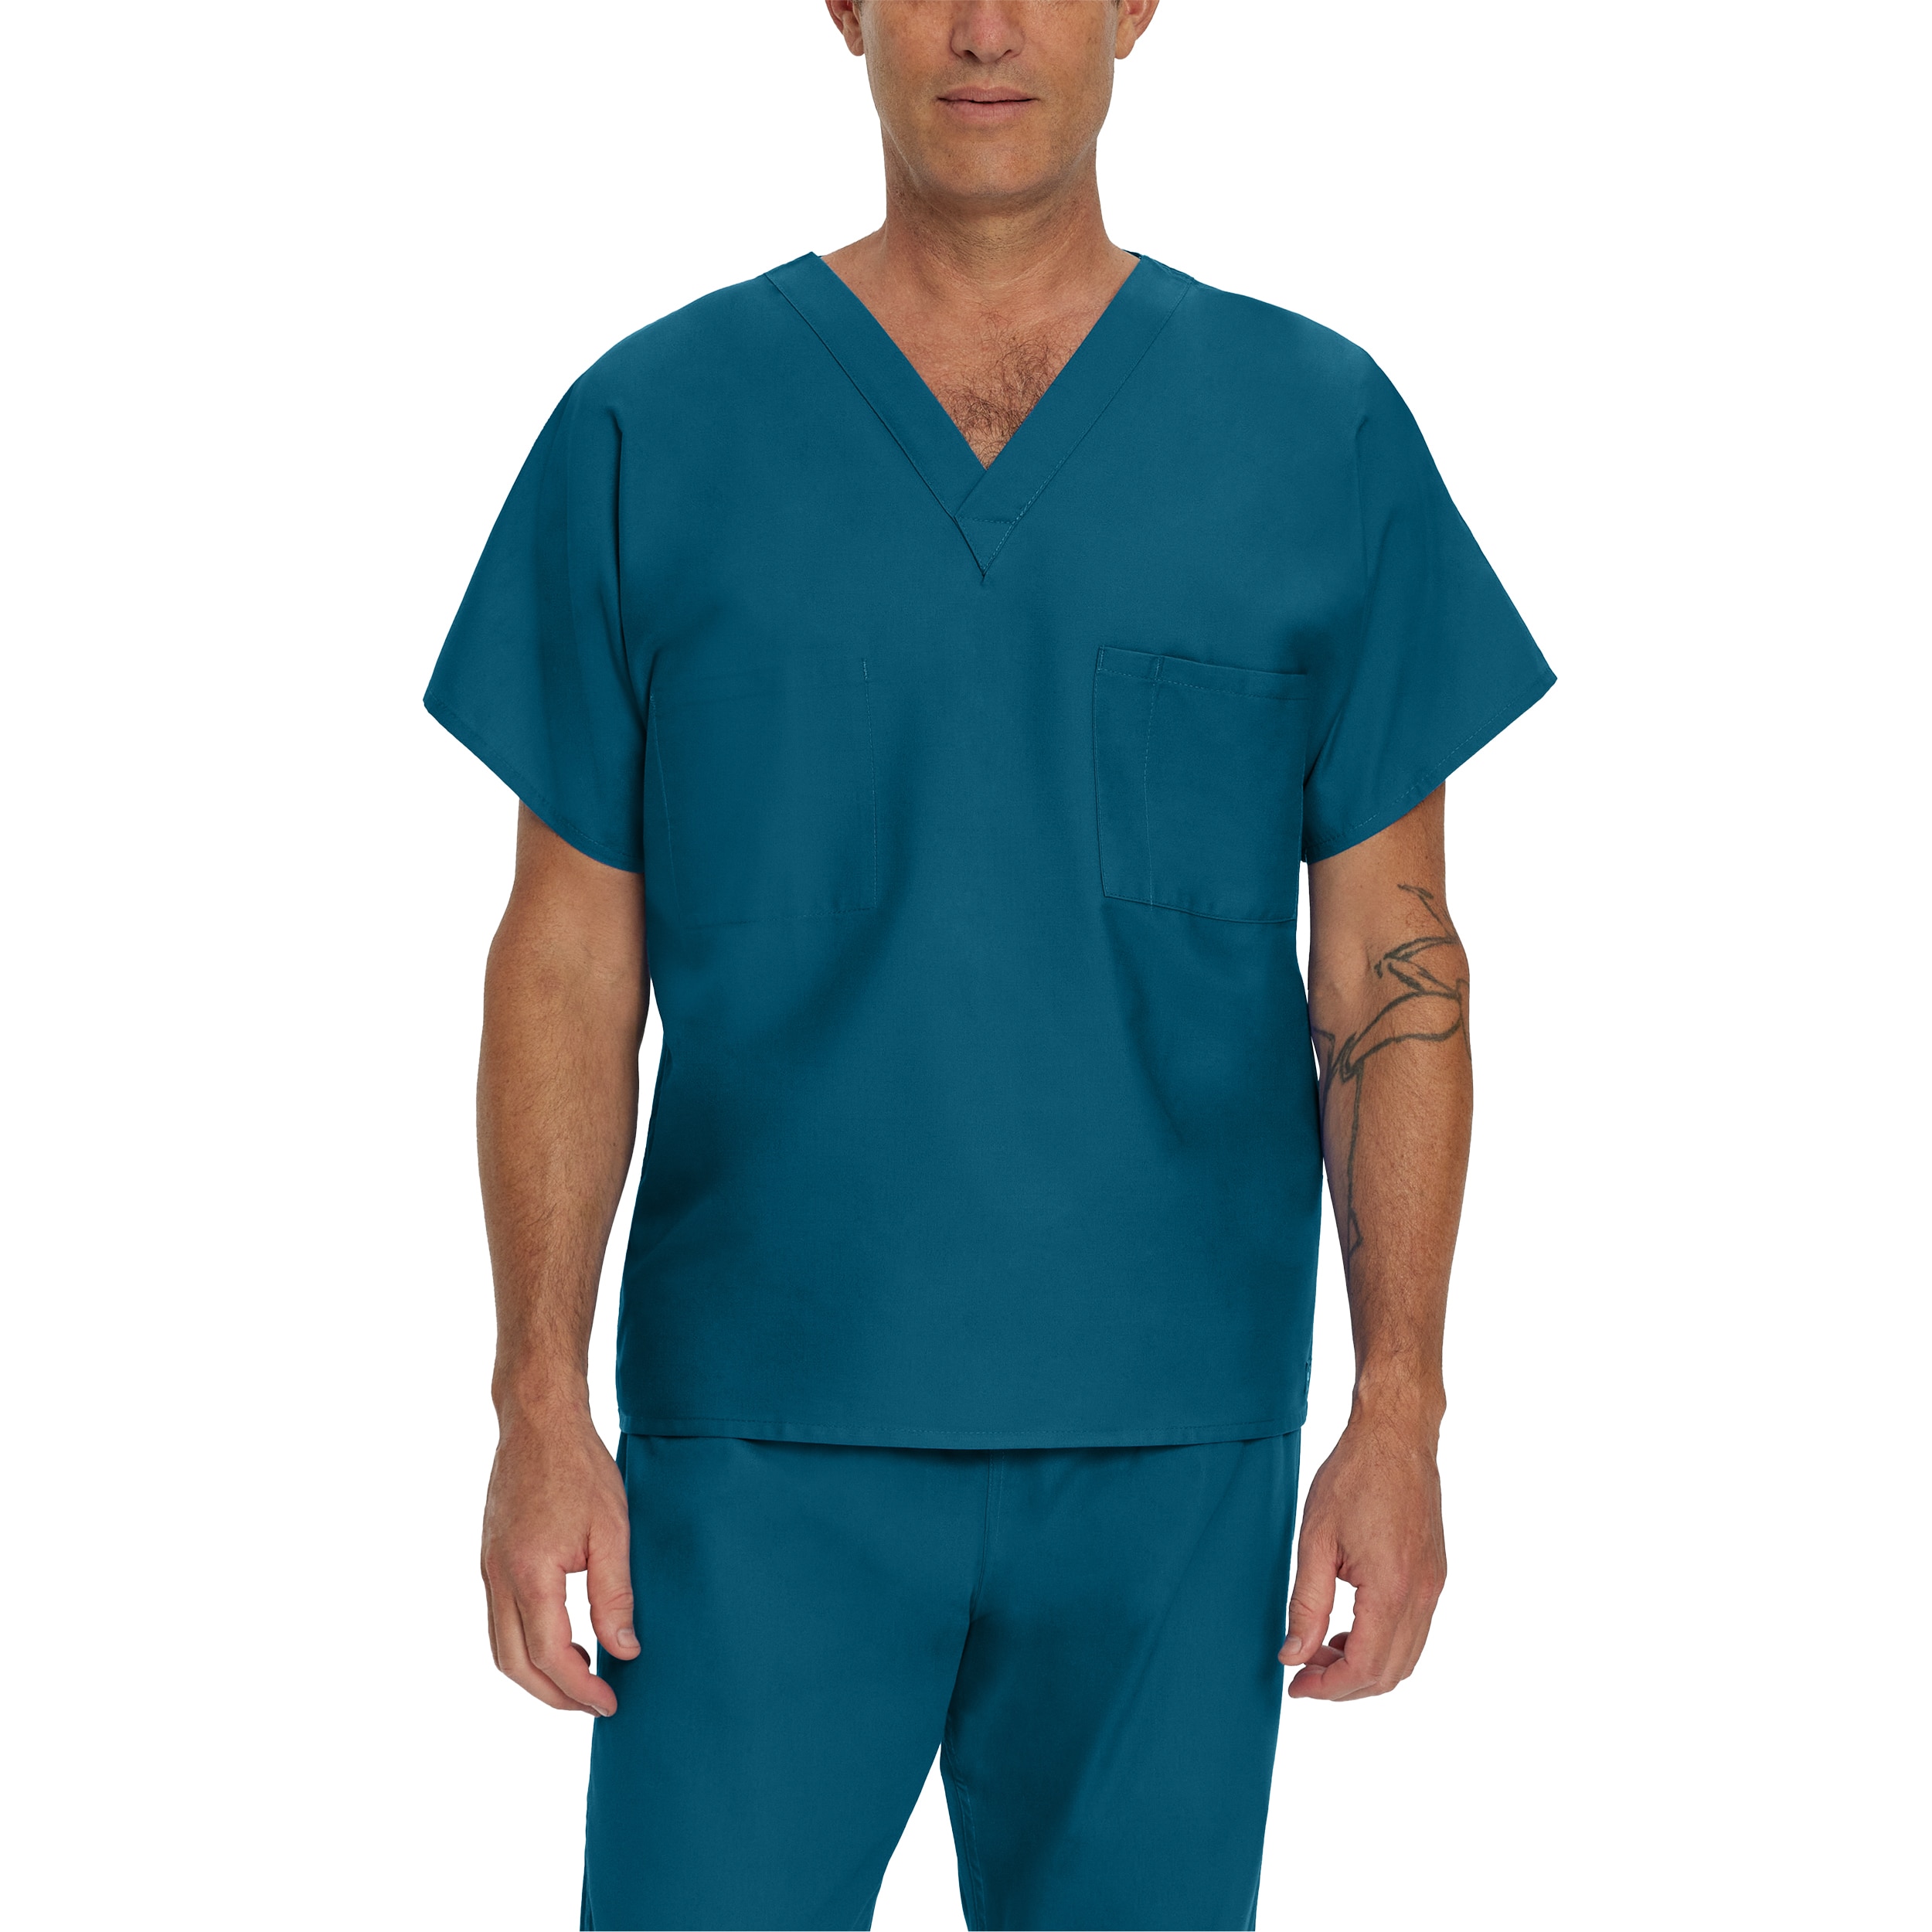 Reversible V-Neck Classic Fit Solid Scrub Top